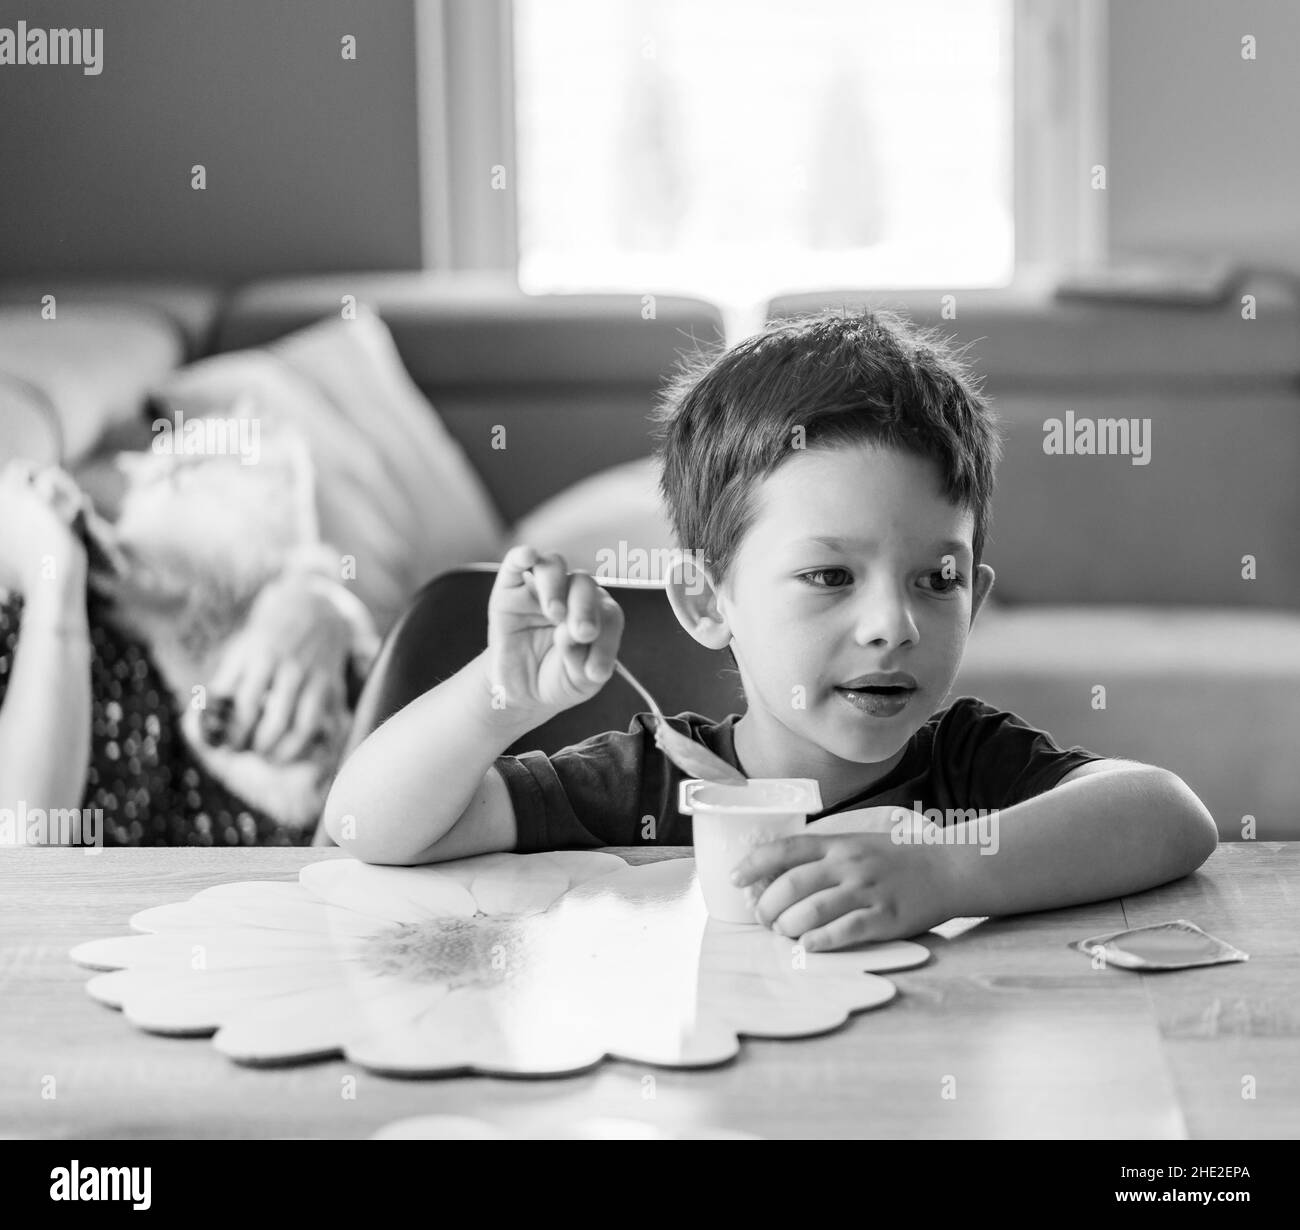 Closeup shot of a young boy eating a yogurt with his mother sitting on the sofa on a background Stock Photo